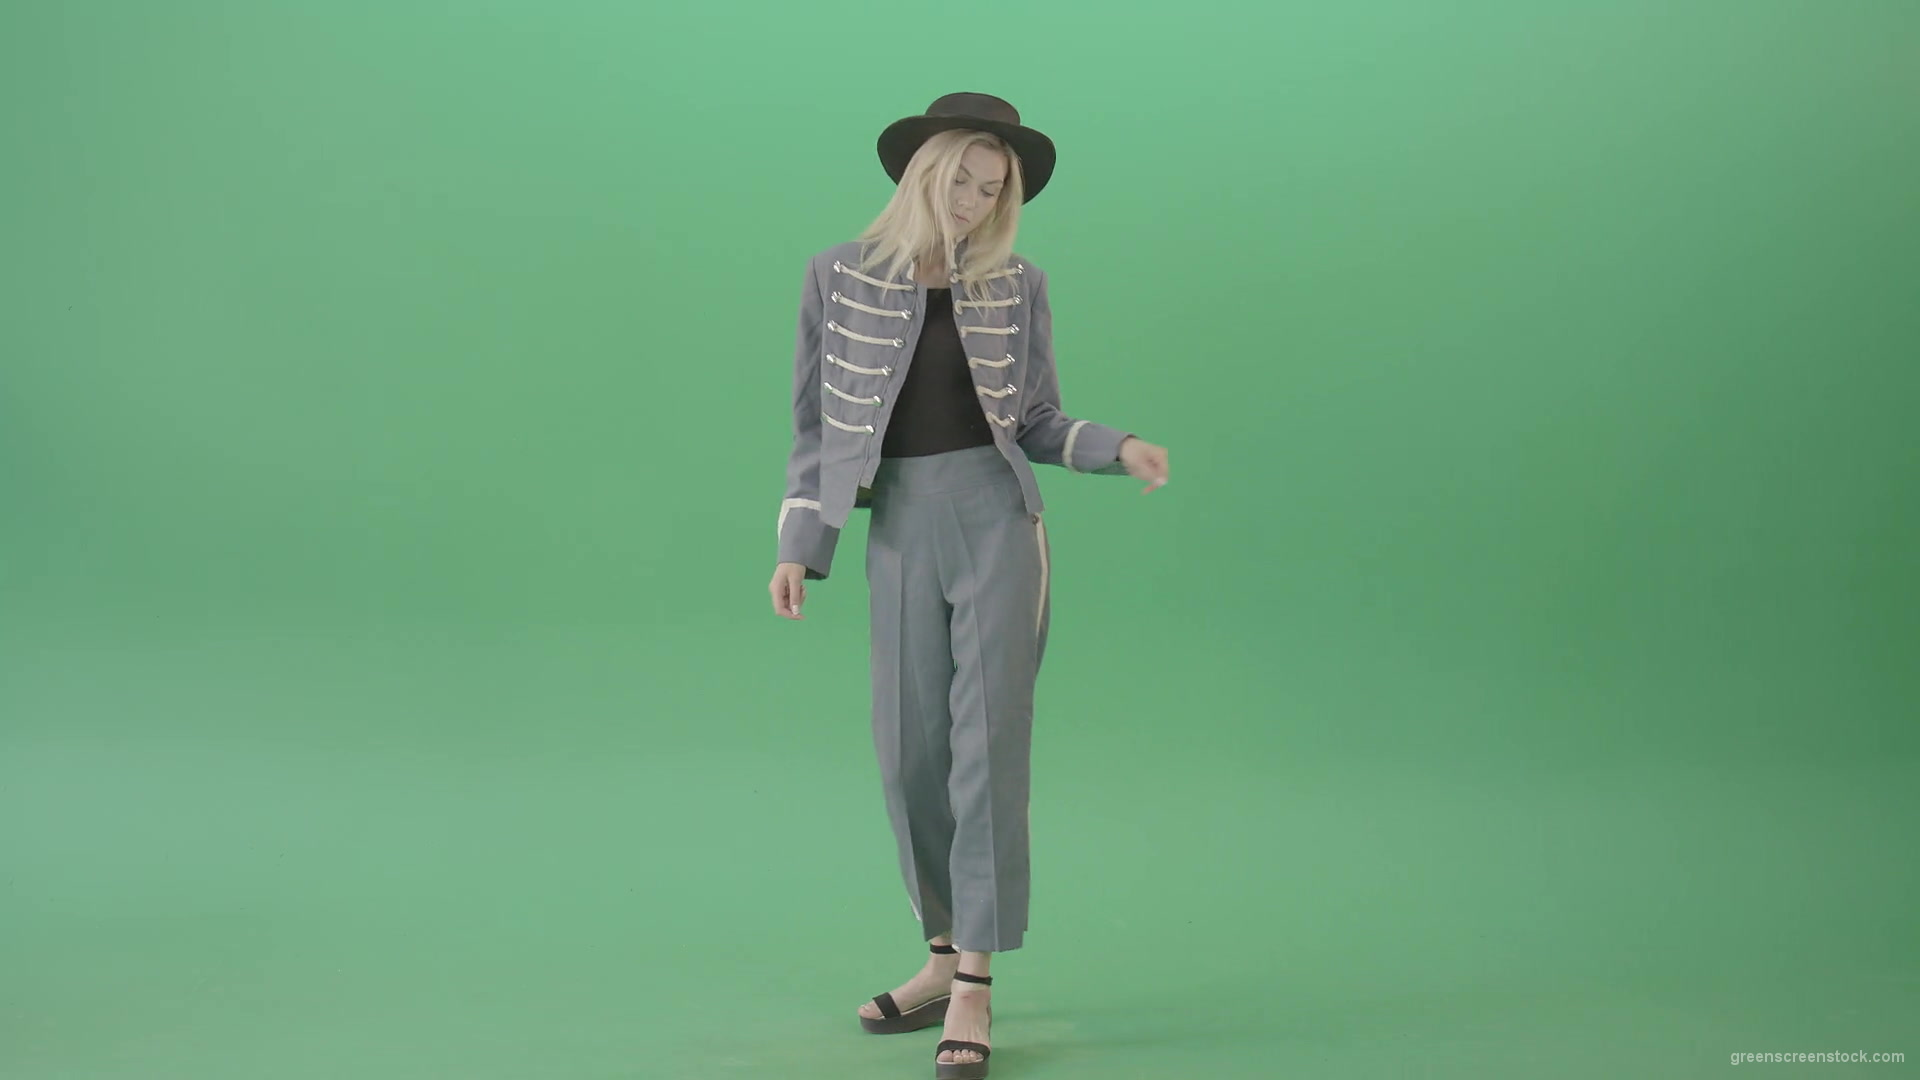 Blonde-Girl-in-Royal-dress-and-black-hat-dancing-house-and-chilling-in-green-screen-studio-4K-Video-Footage-1920_004 Green Screen Stock